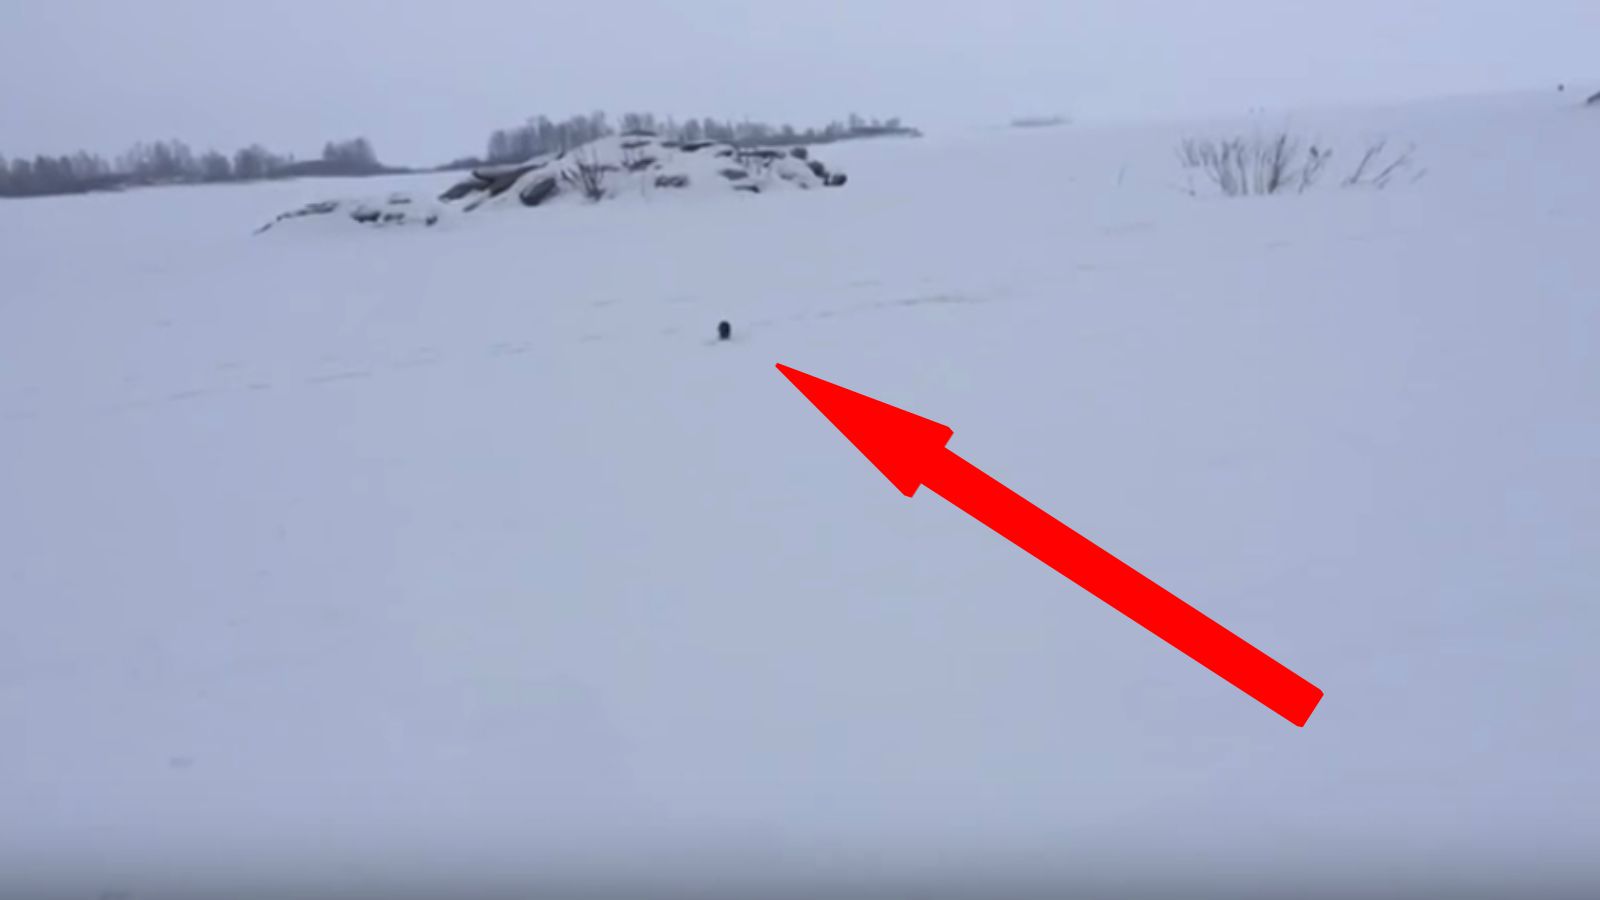 A Fisherman Notices Something Running Towards Him in the Distance. What He Does Next Is Adorable!